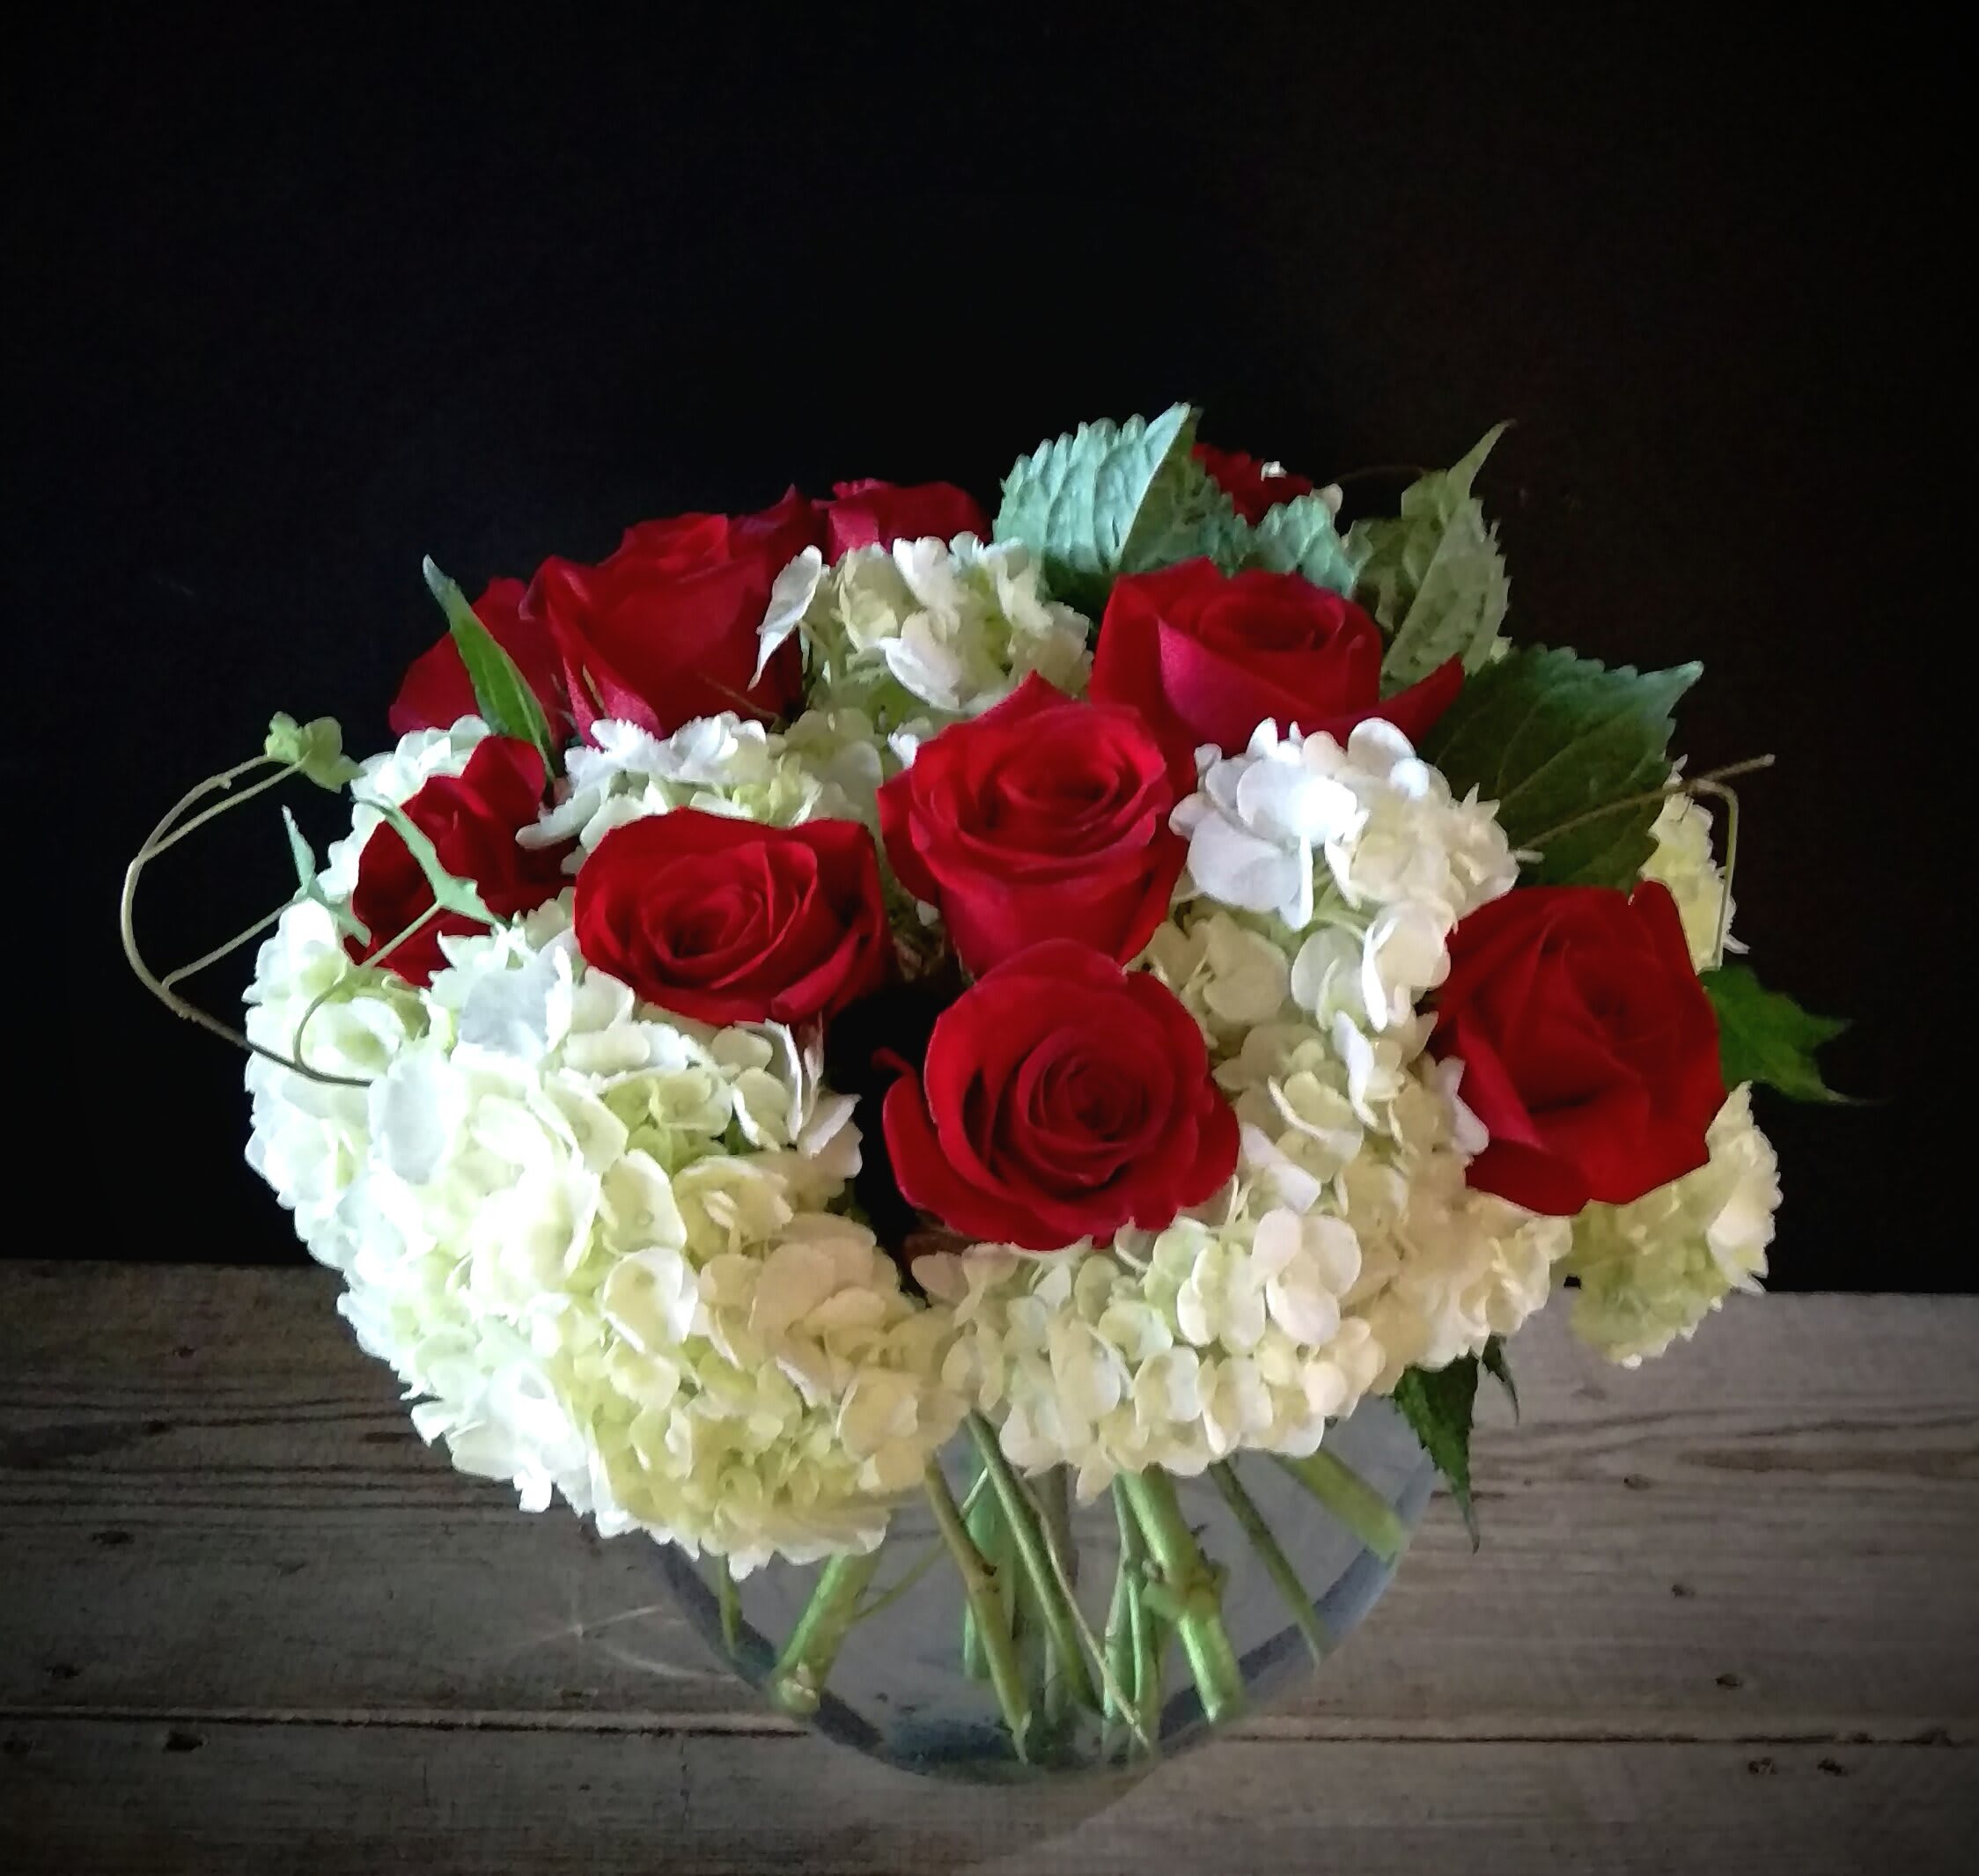  Our Love Eternal - The Our Love Eternal Bouquet is a symbol of unending love and affection.. Brilliant red roses  pop against a bed of white hydrangea simply accented with stems of  ivy and beautifully arranged in a clear glass vessel to create a wonderful way to convey your deepest sentiments.